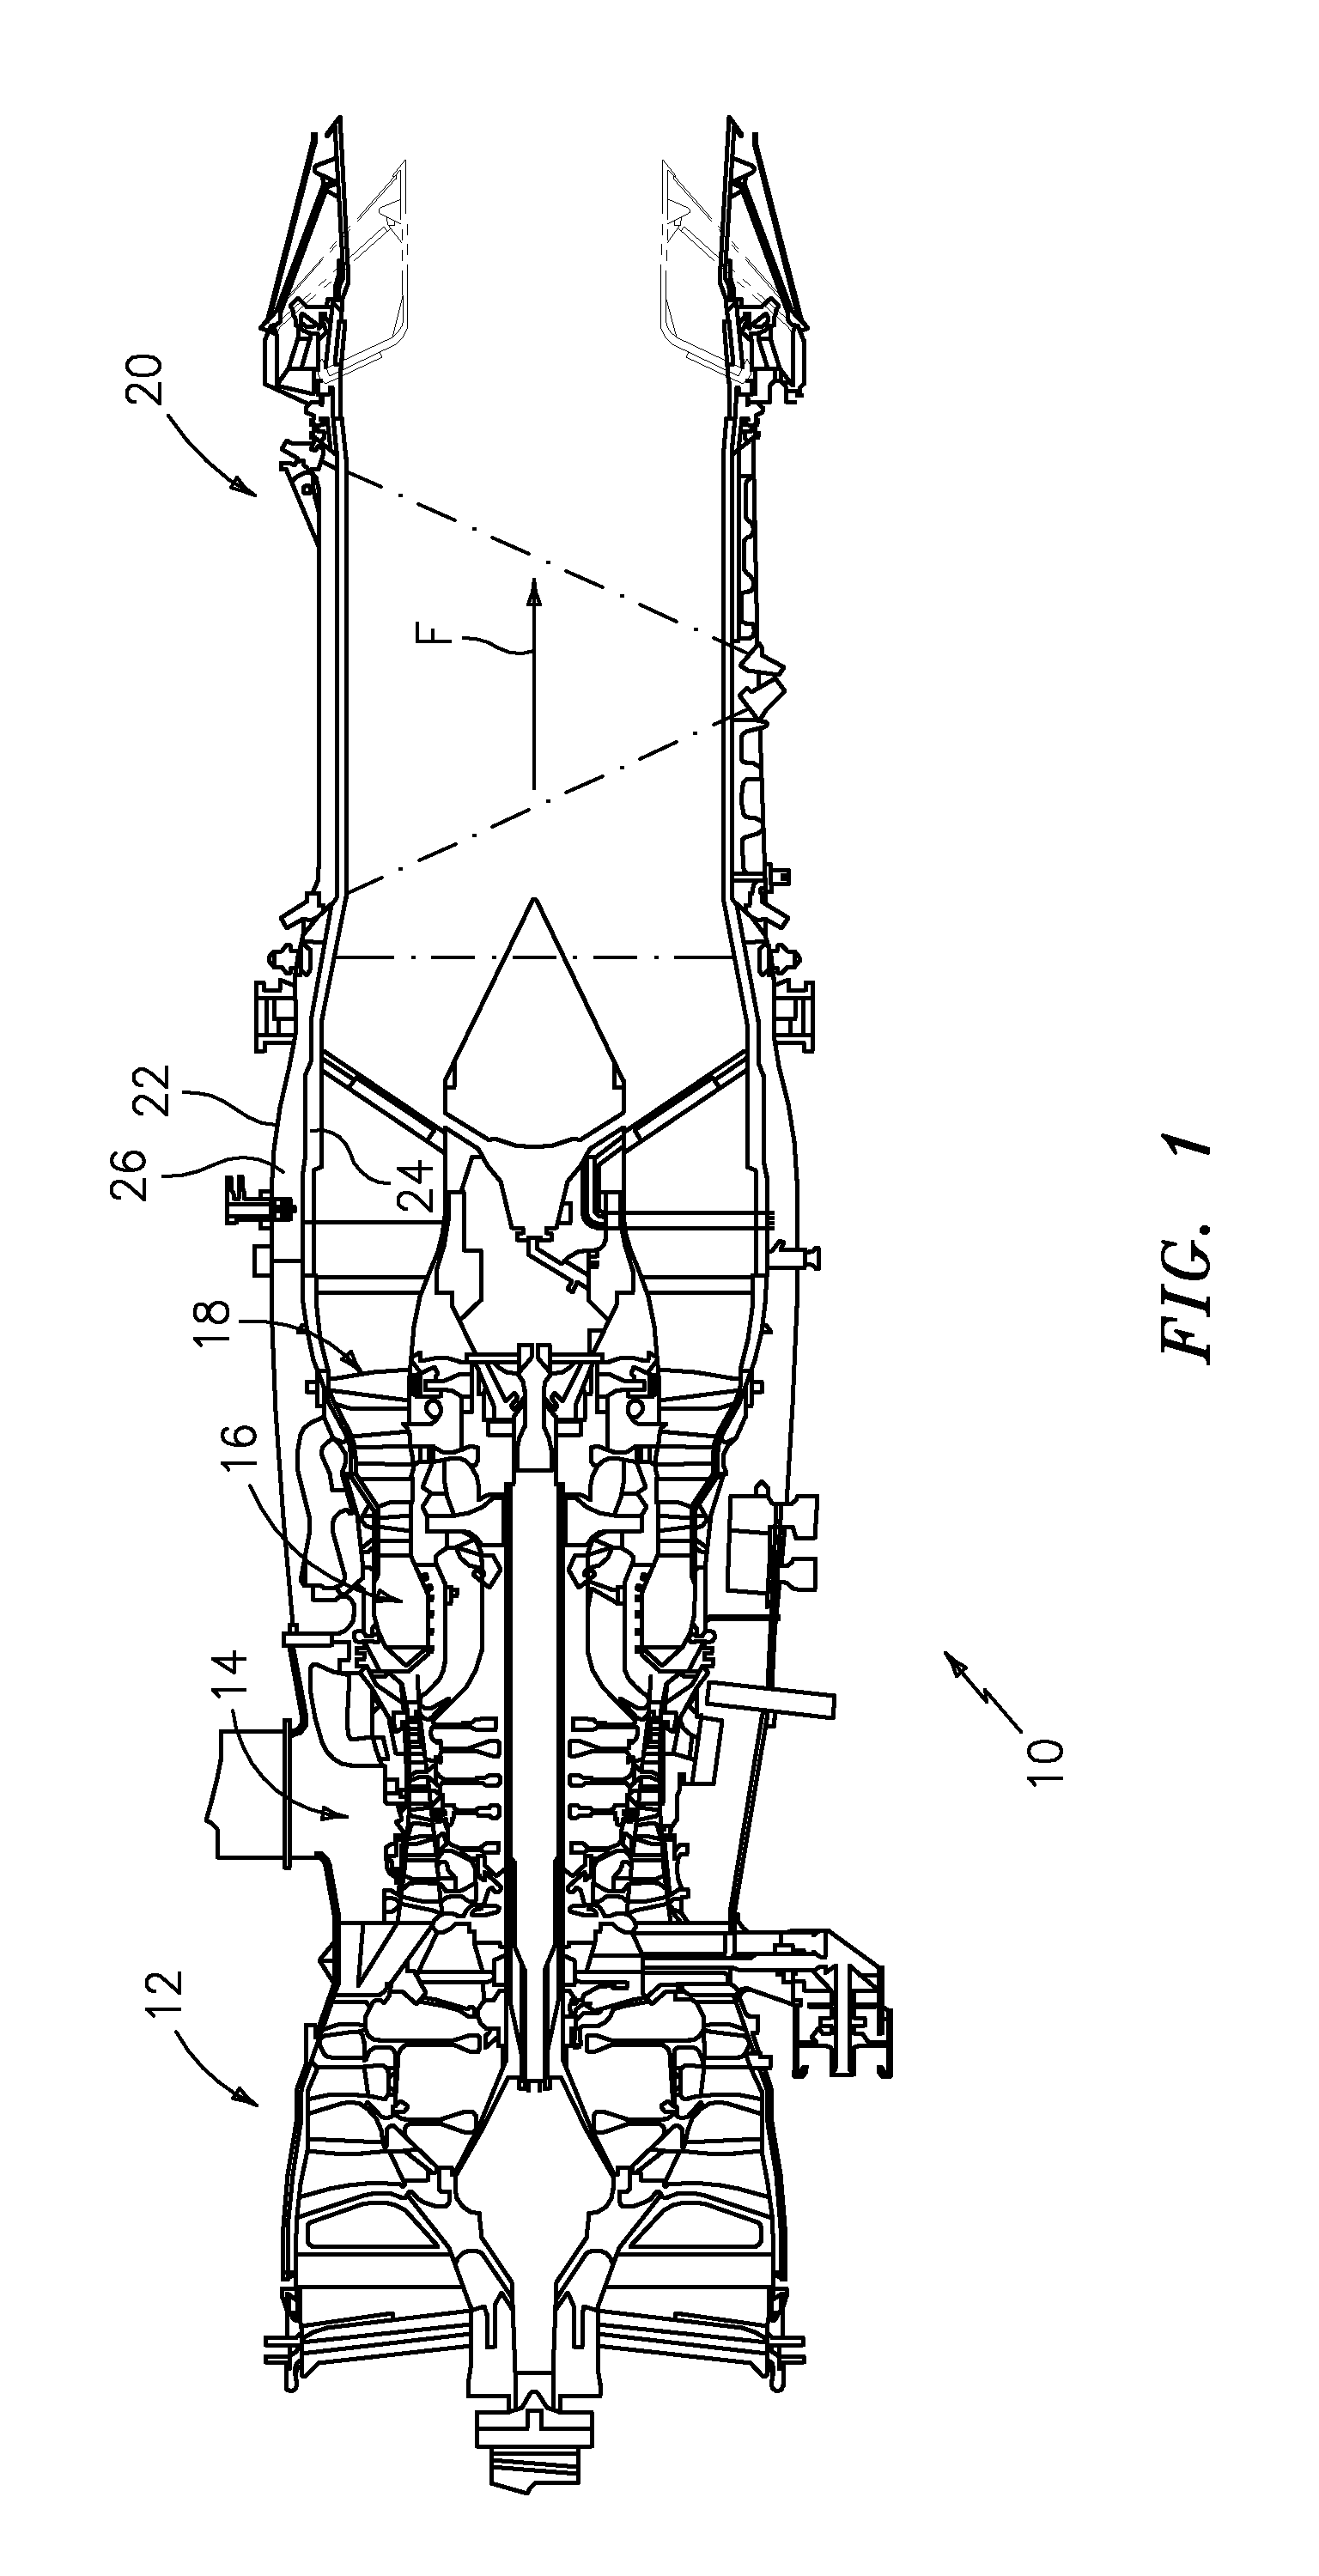 Linkage system with wear reduction